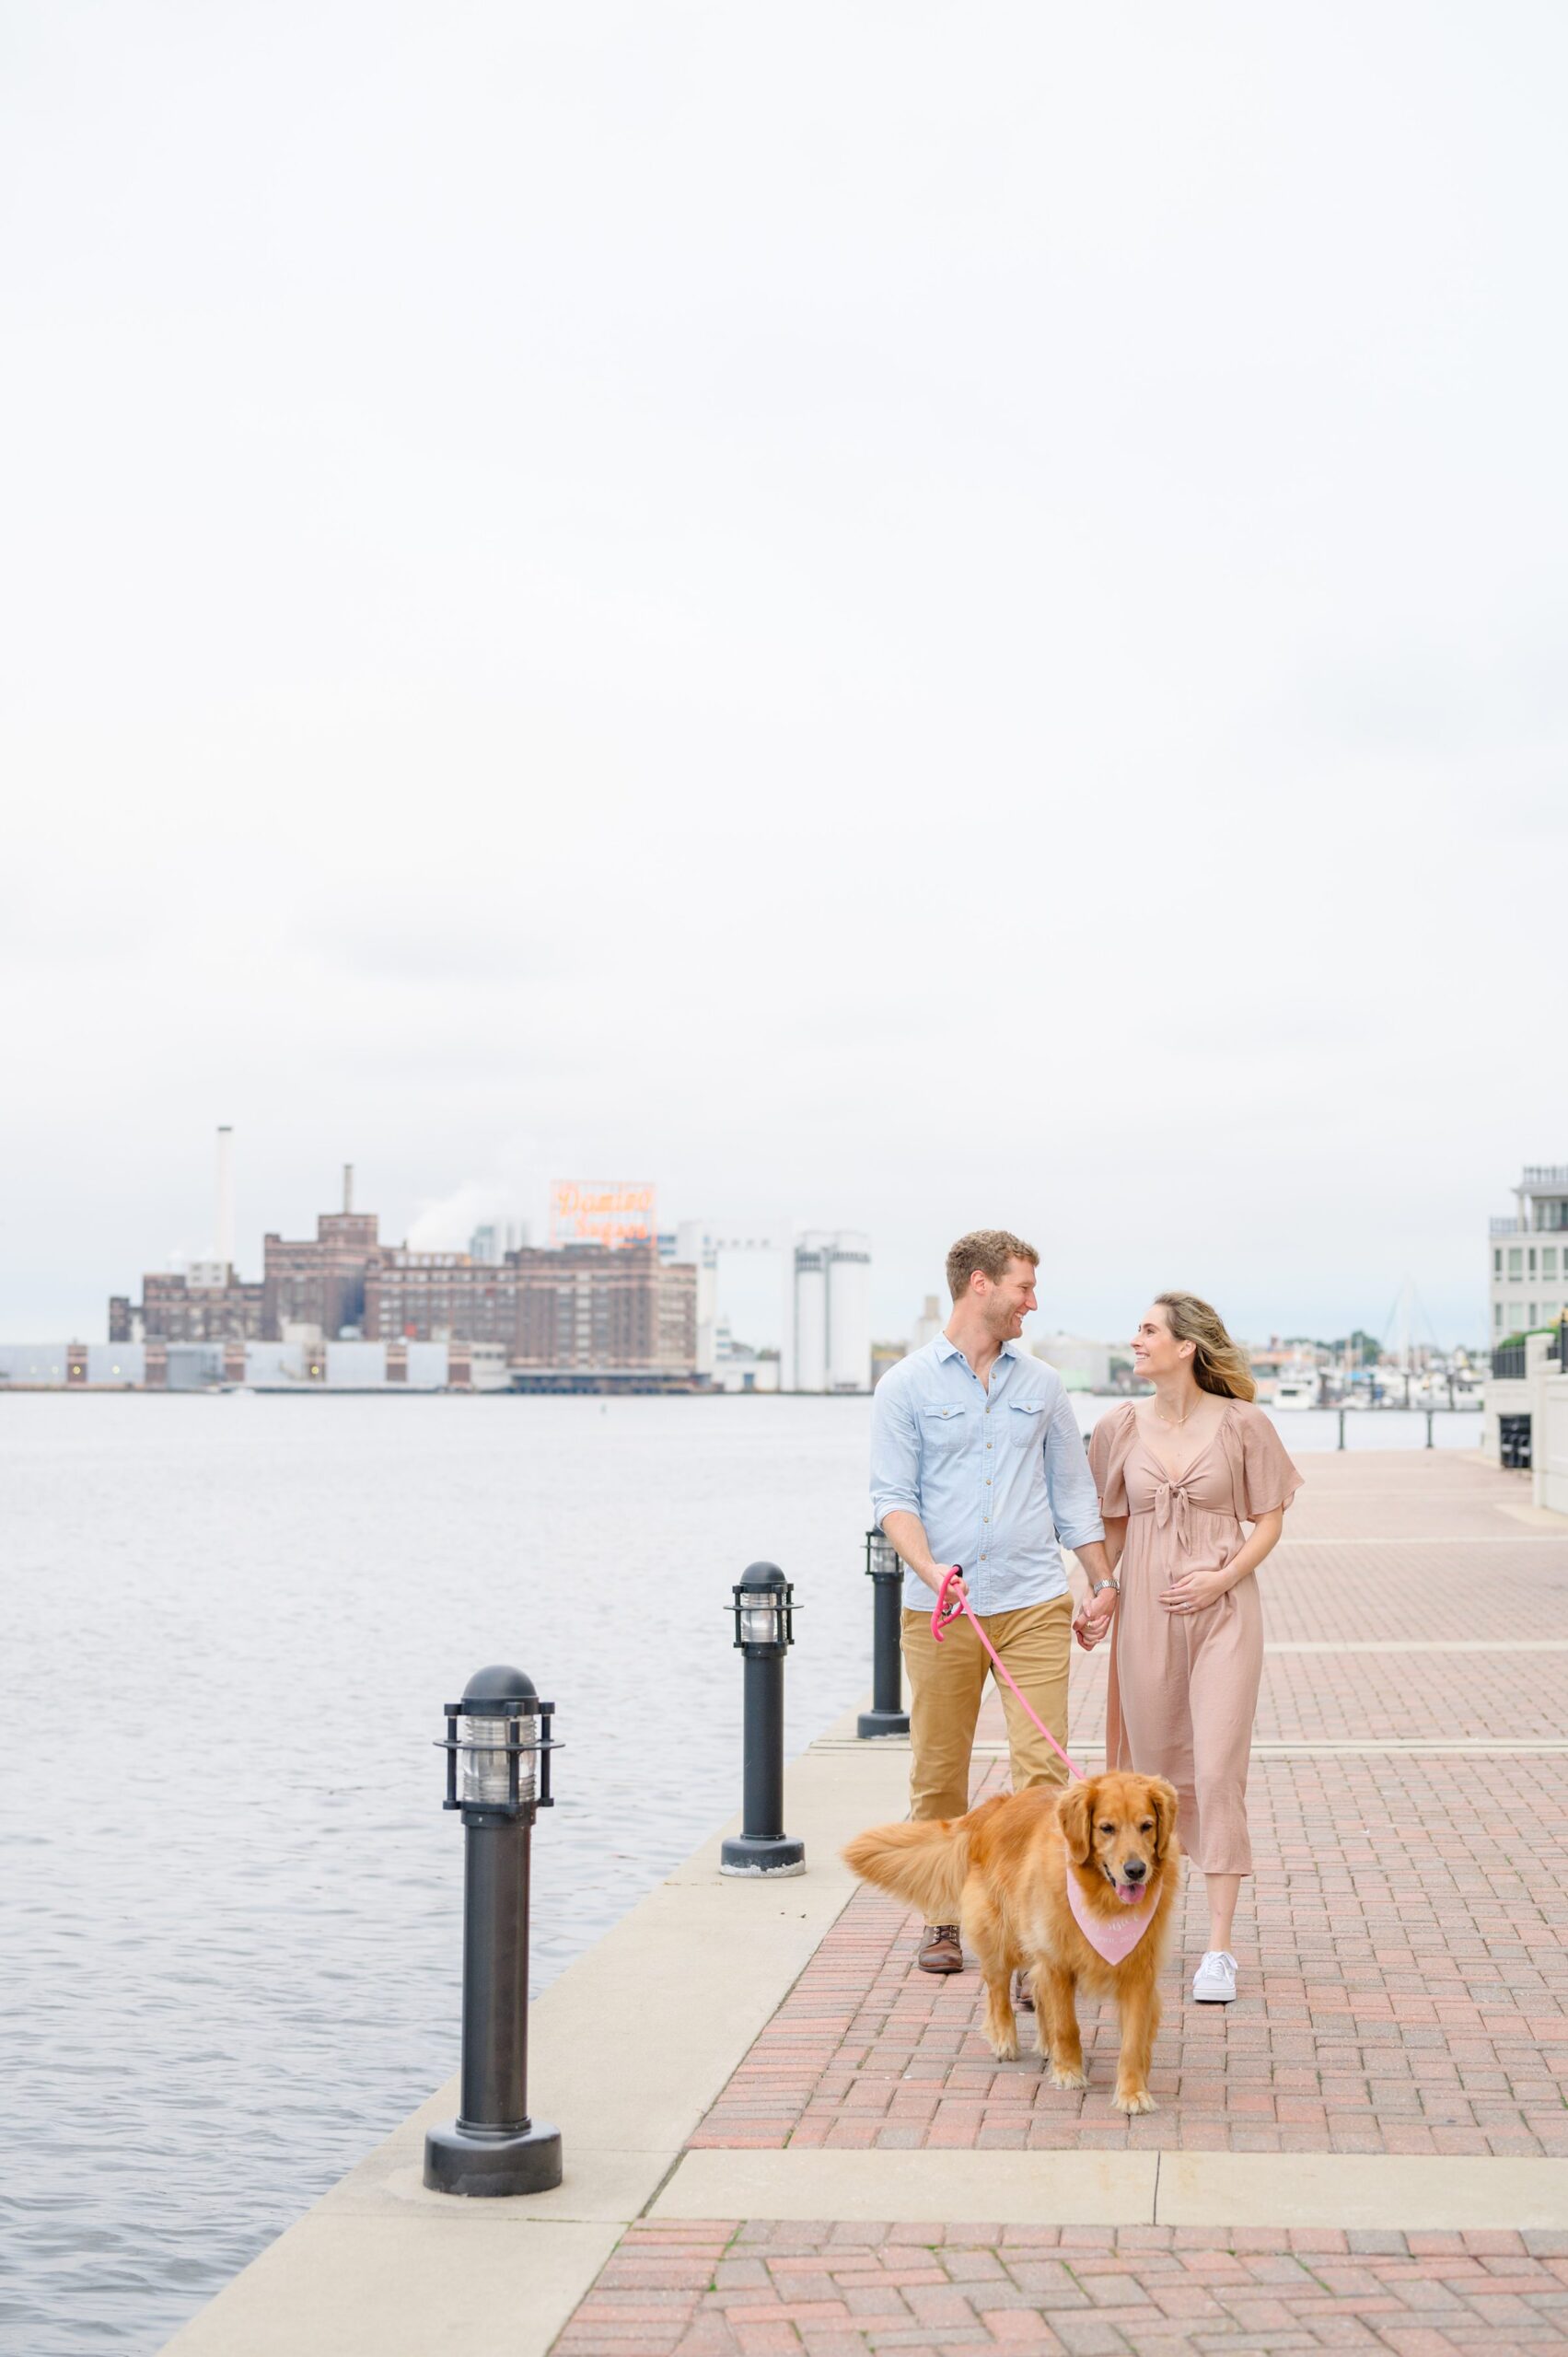 Pregnancy announcement photos at the Baltimore Inner Harbor photographed by Baltimore Maternity Photographer Cait Kramer.